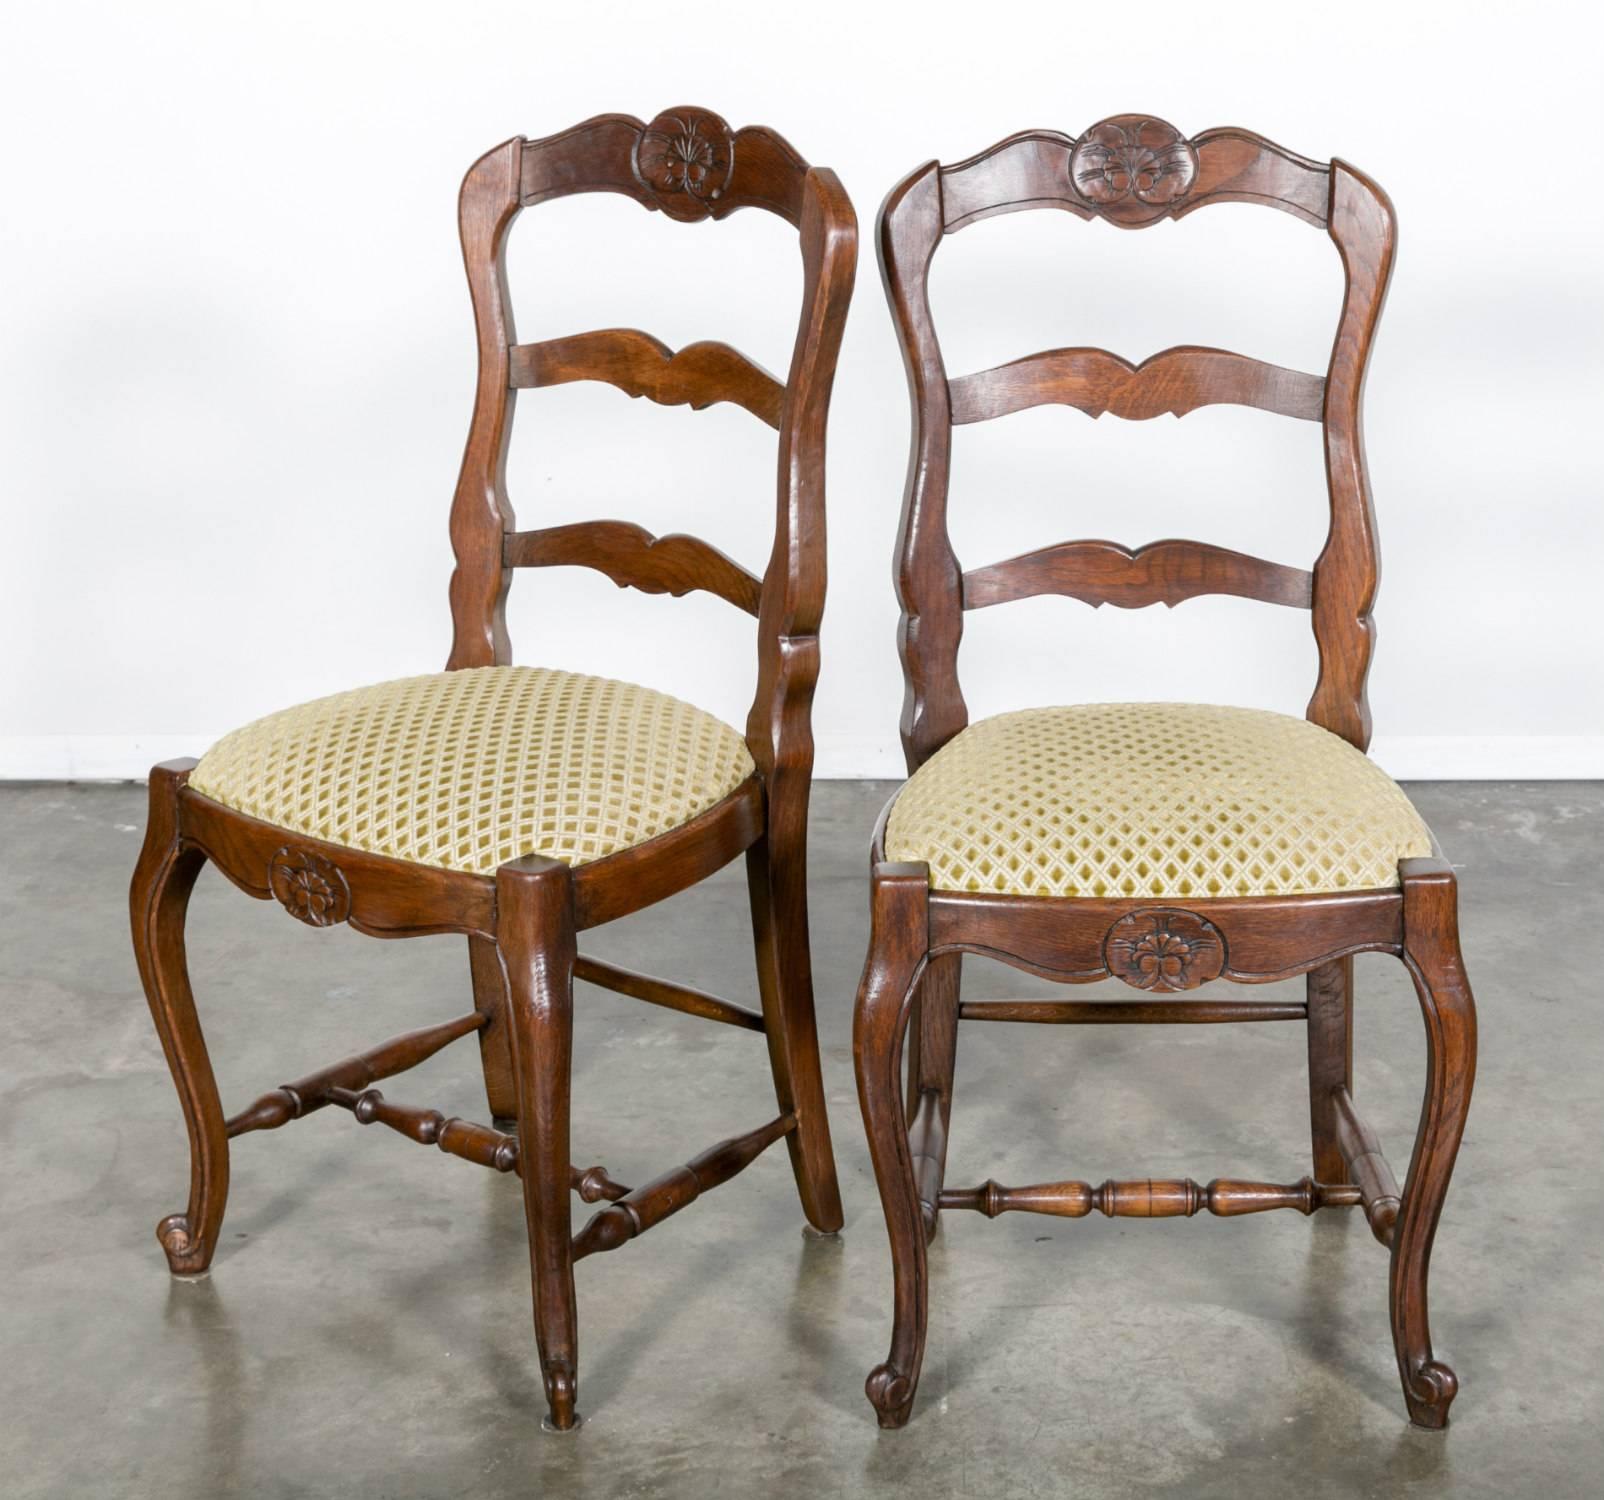 Set of six Country French dining chairs with upholstered seats and typical Louis XV motifs. Handcrafted from solid oak, this charming set dates from the early 1900s. Each chair is decorated with floral motifs on the crest rail and apron. The front